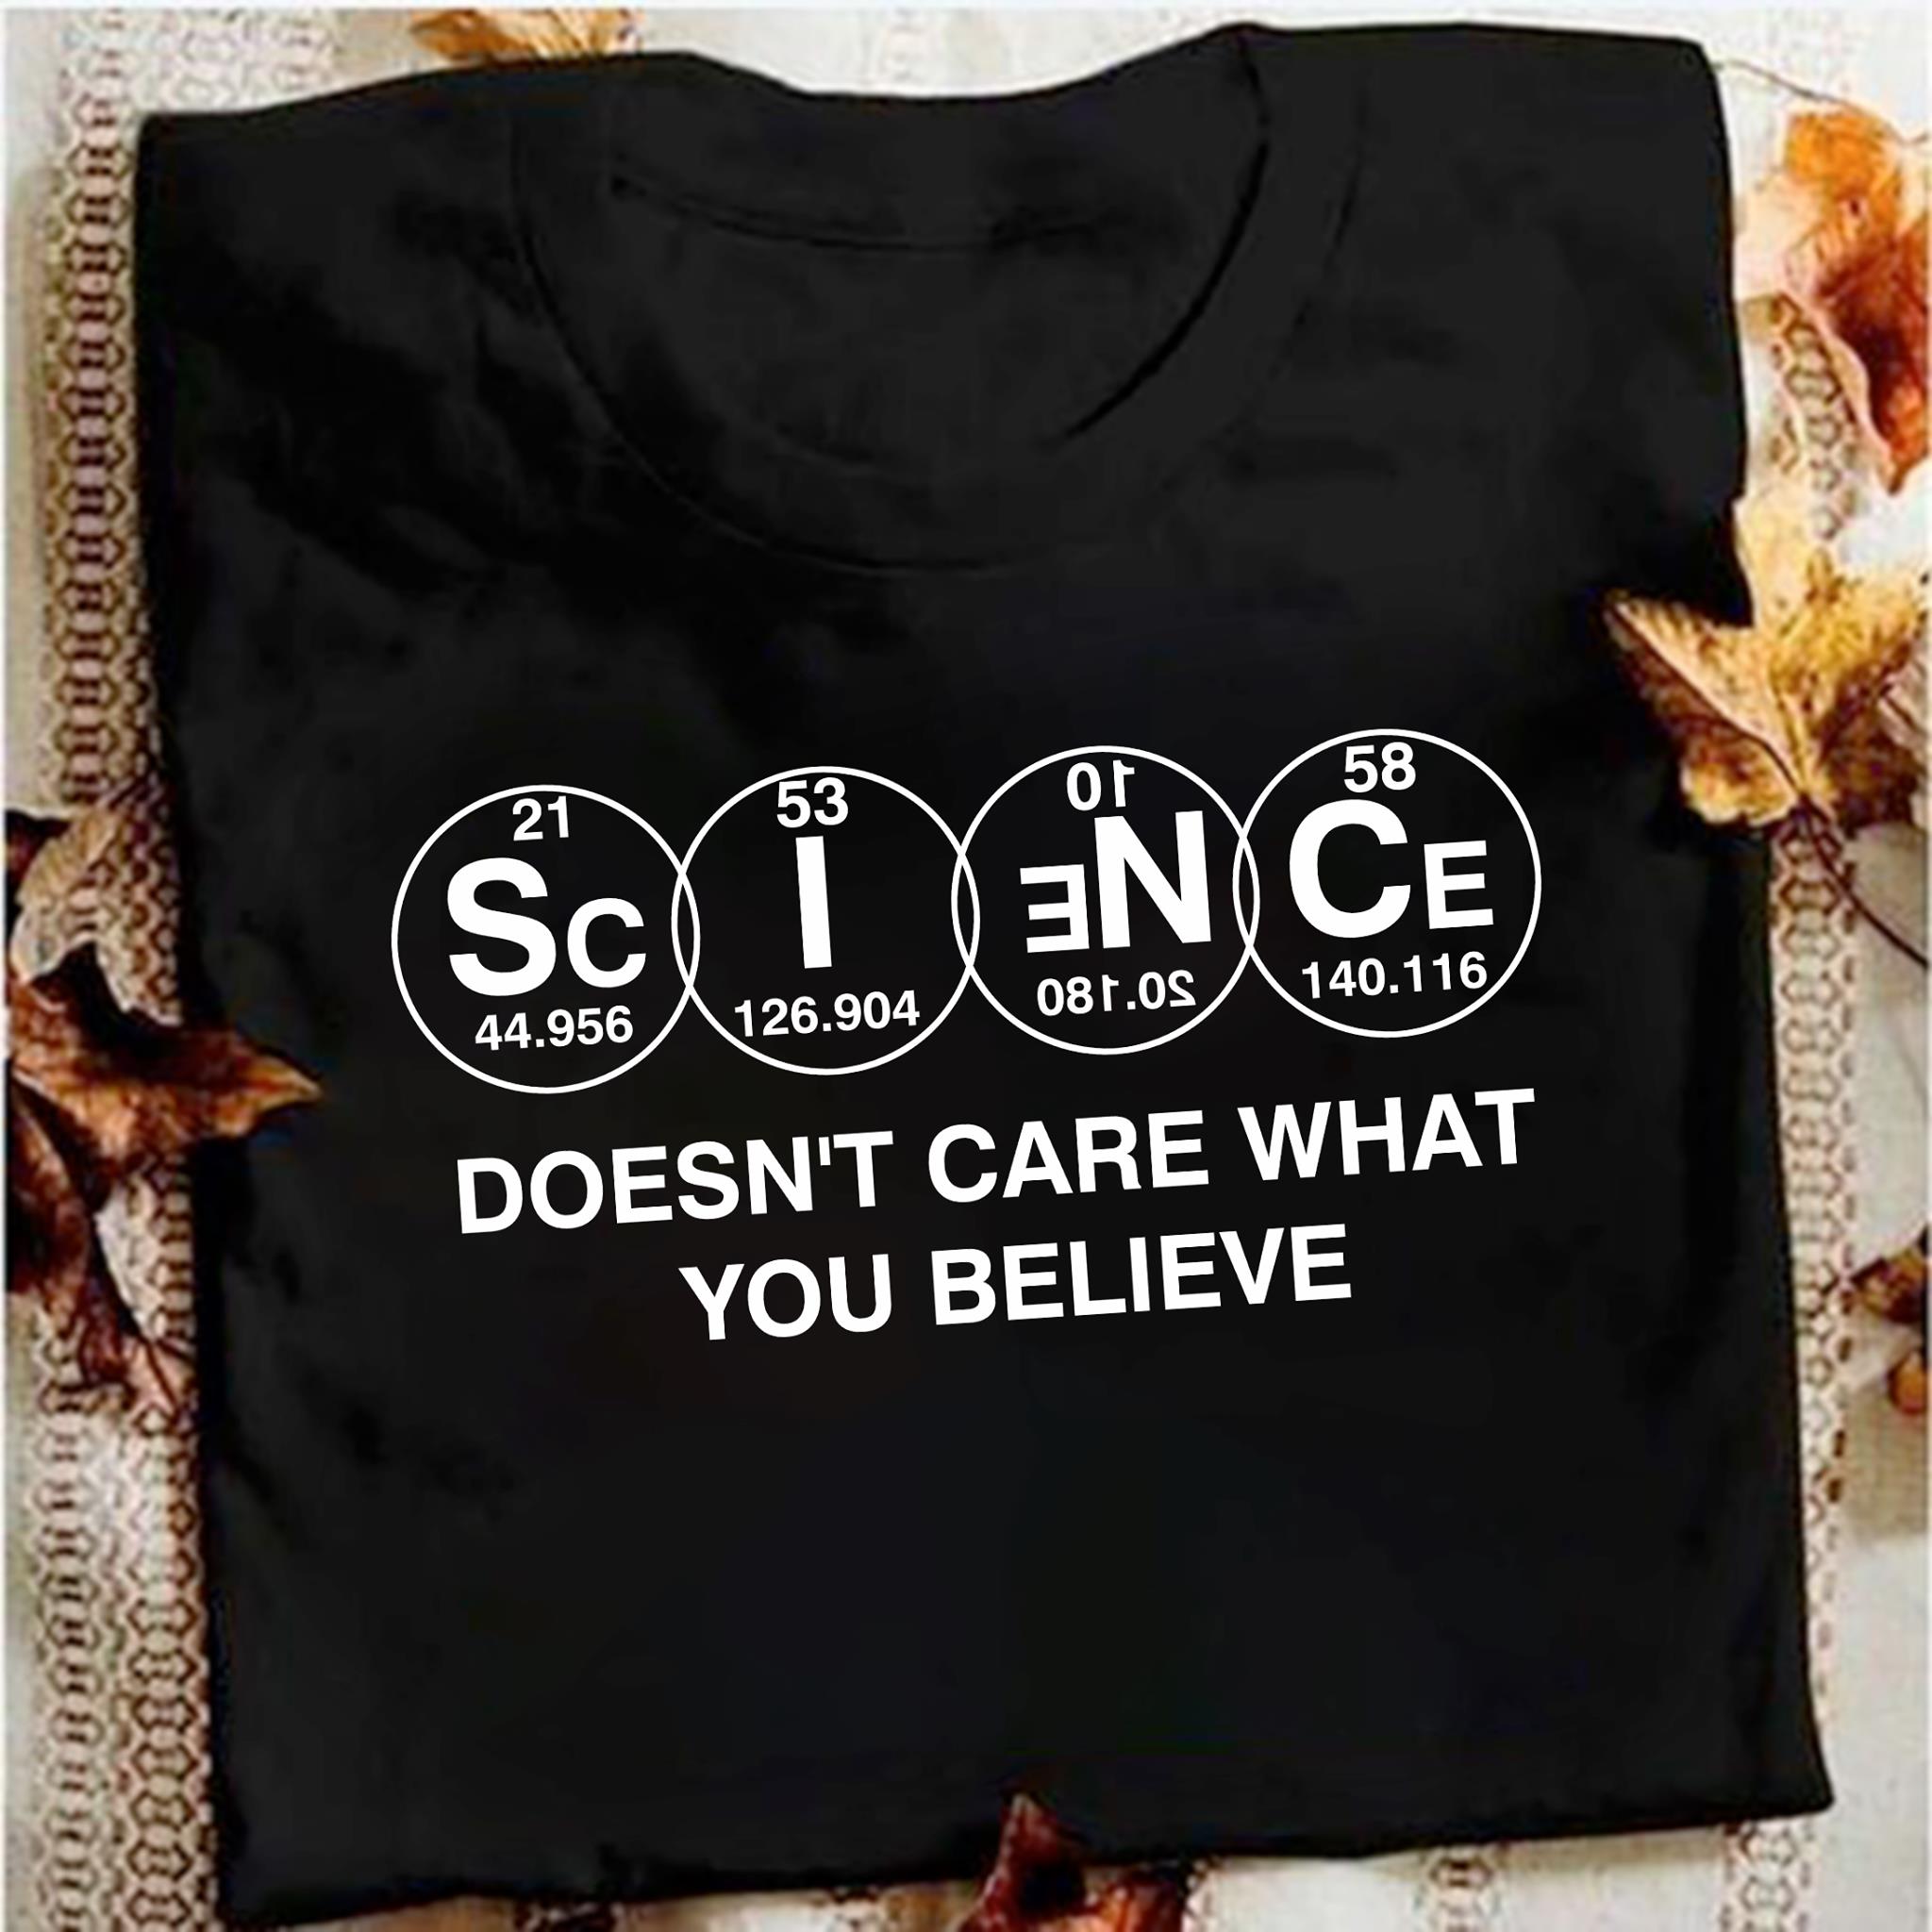 Science doesn't care what you believe